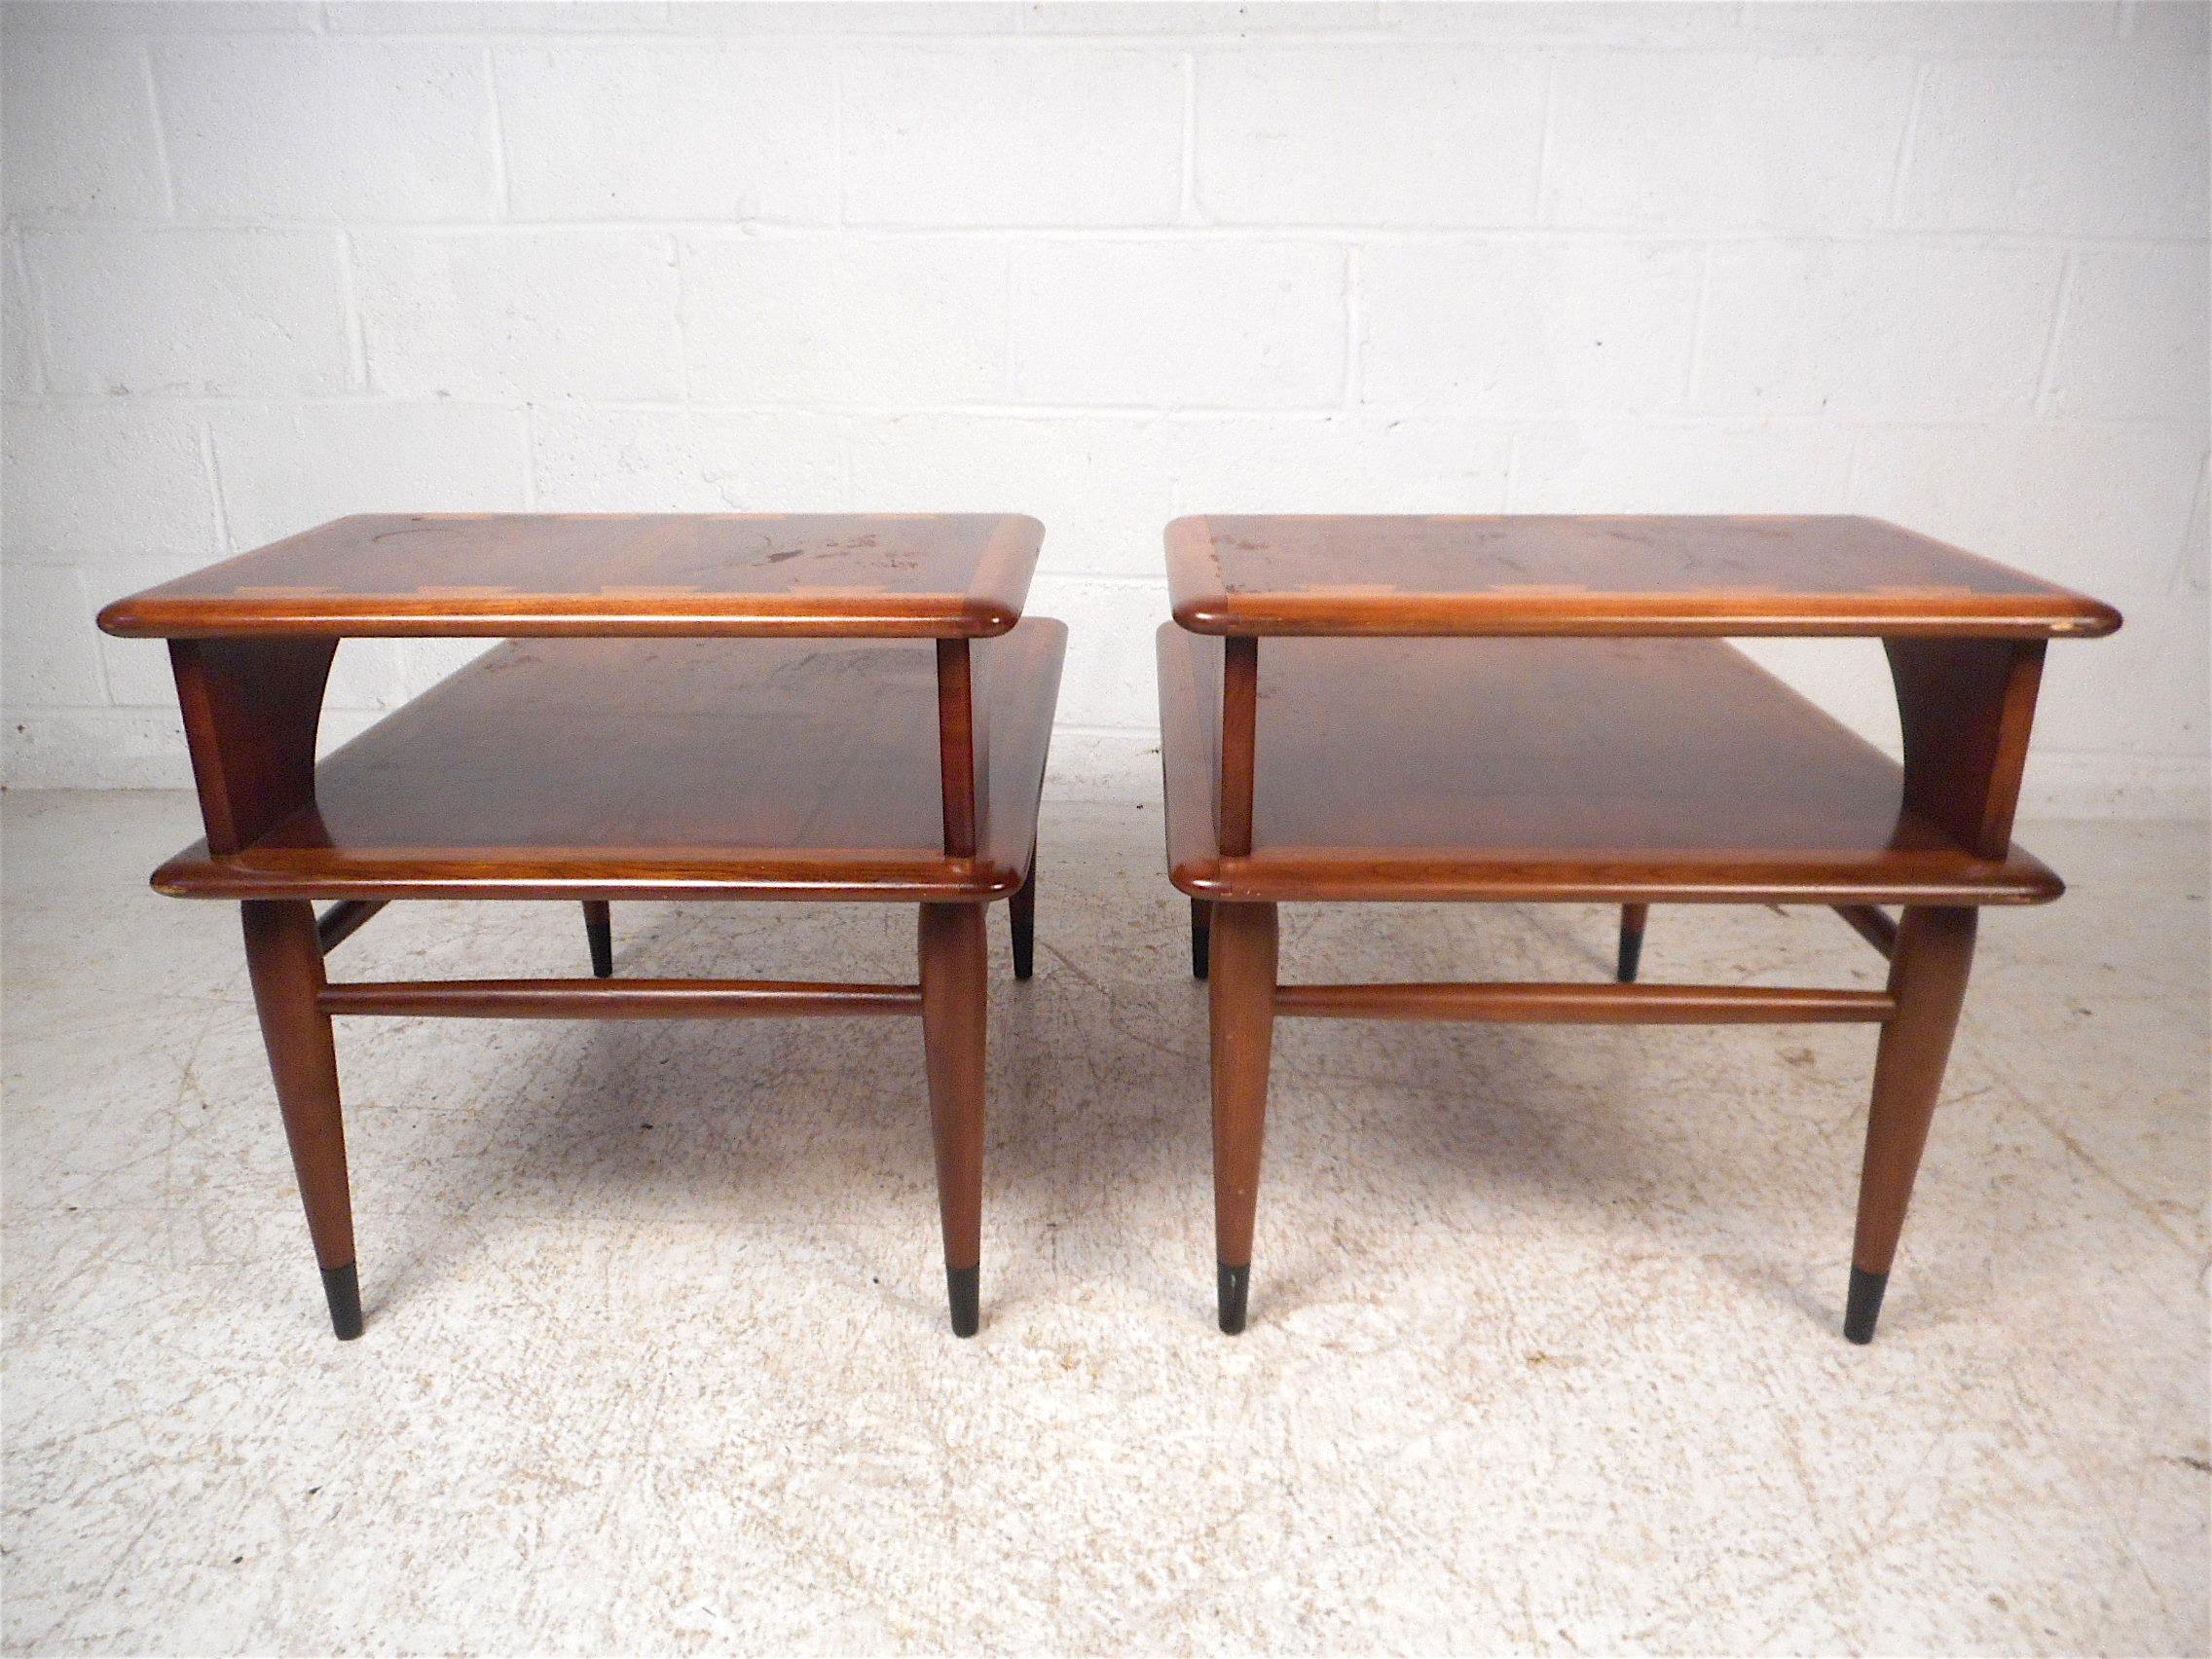 Mid-Century Modern Midcentury Two-Tier End Tables by Lane, a Pair